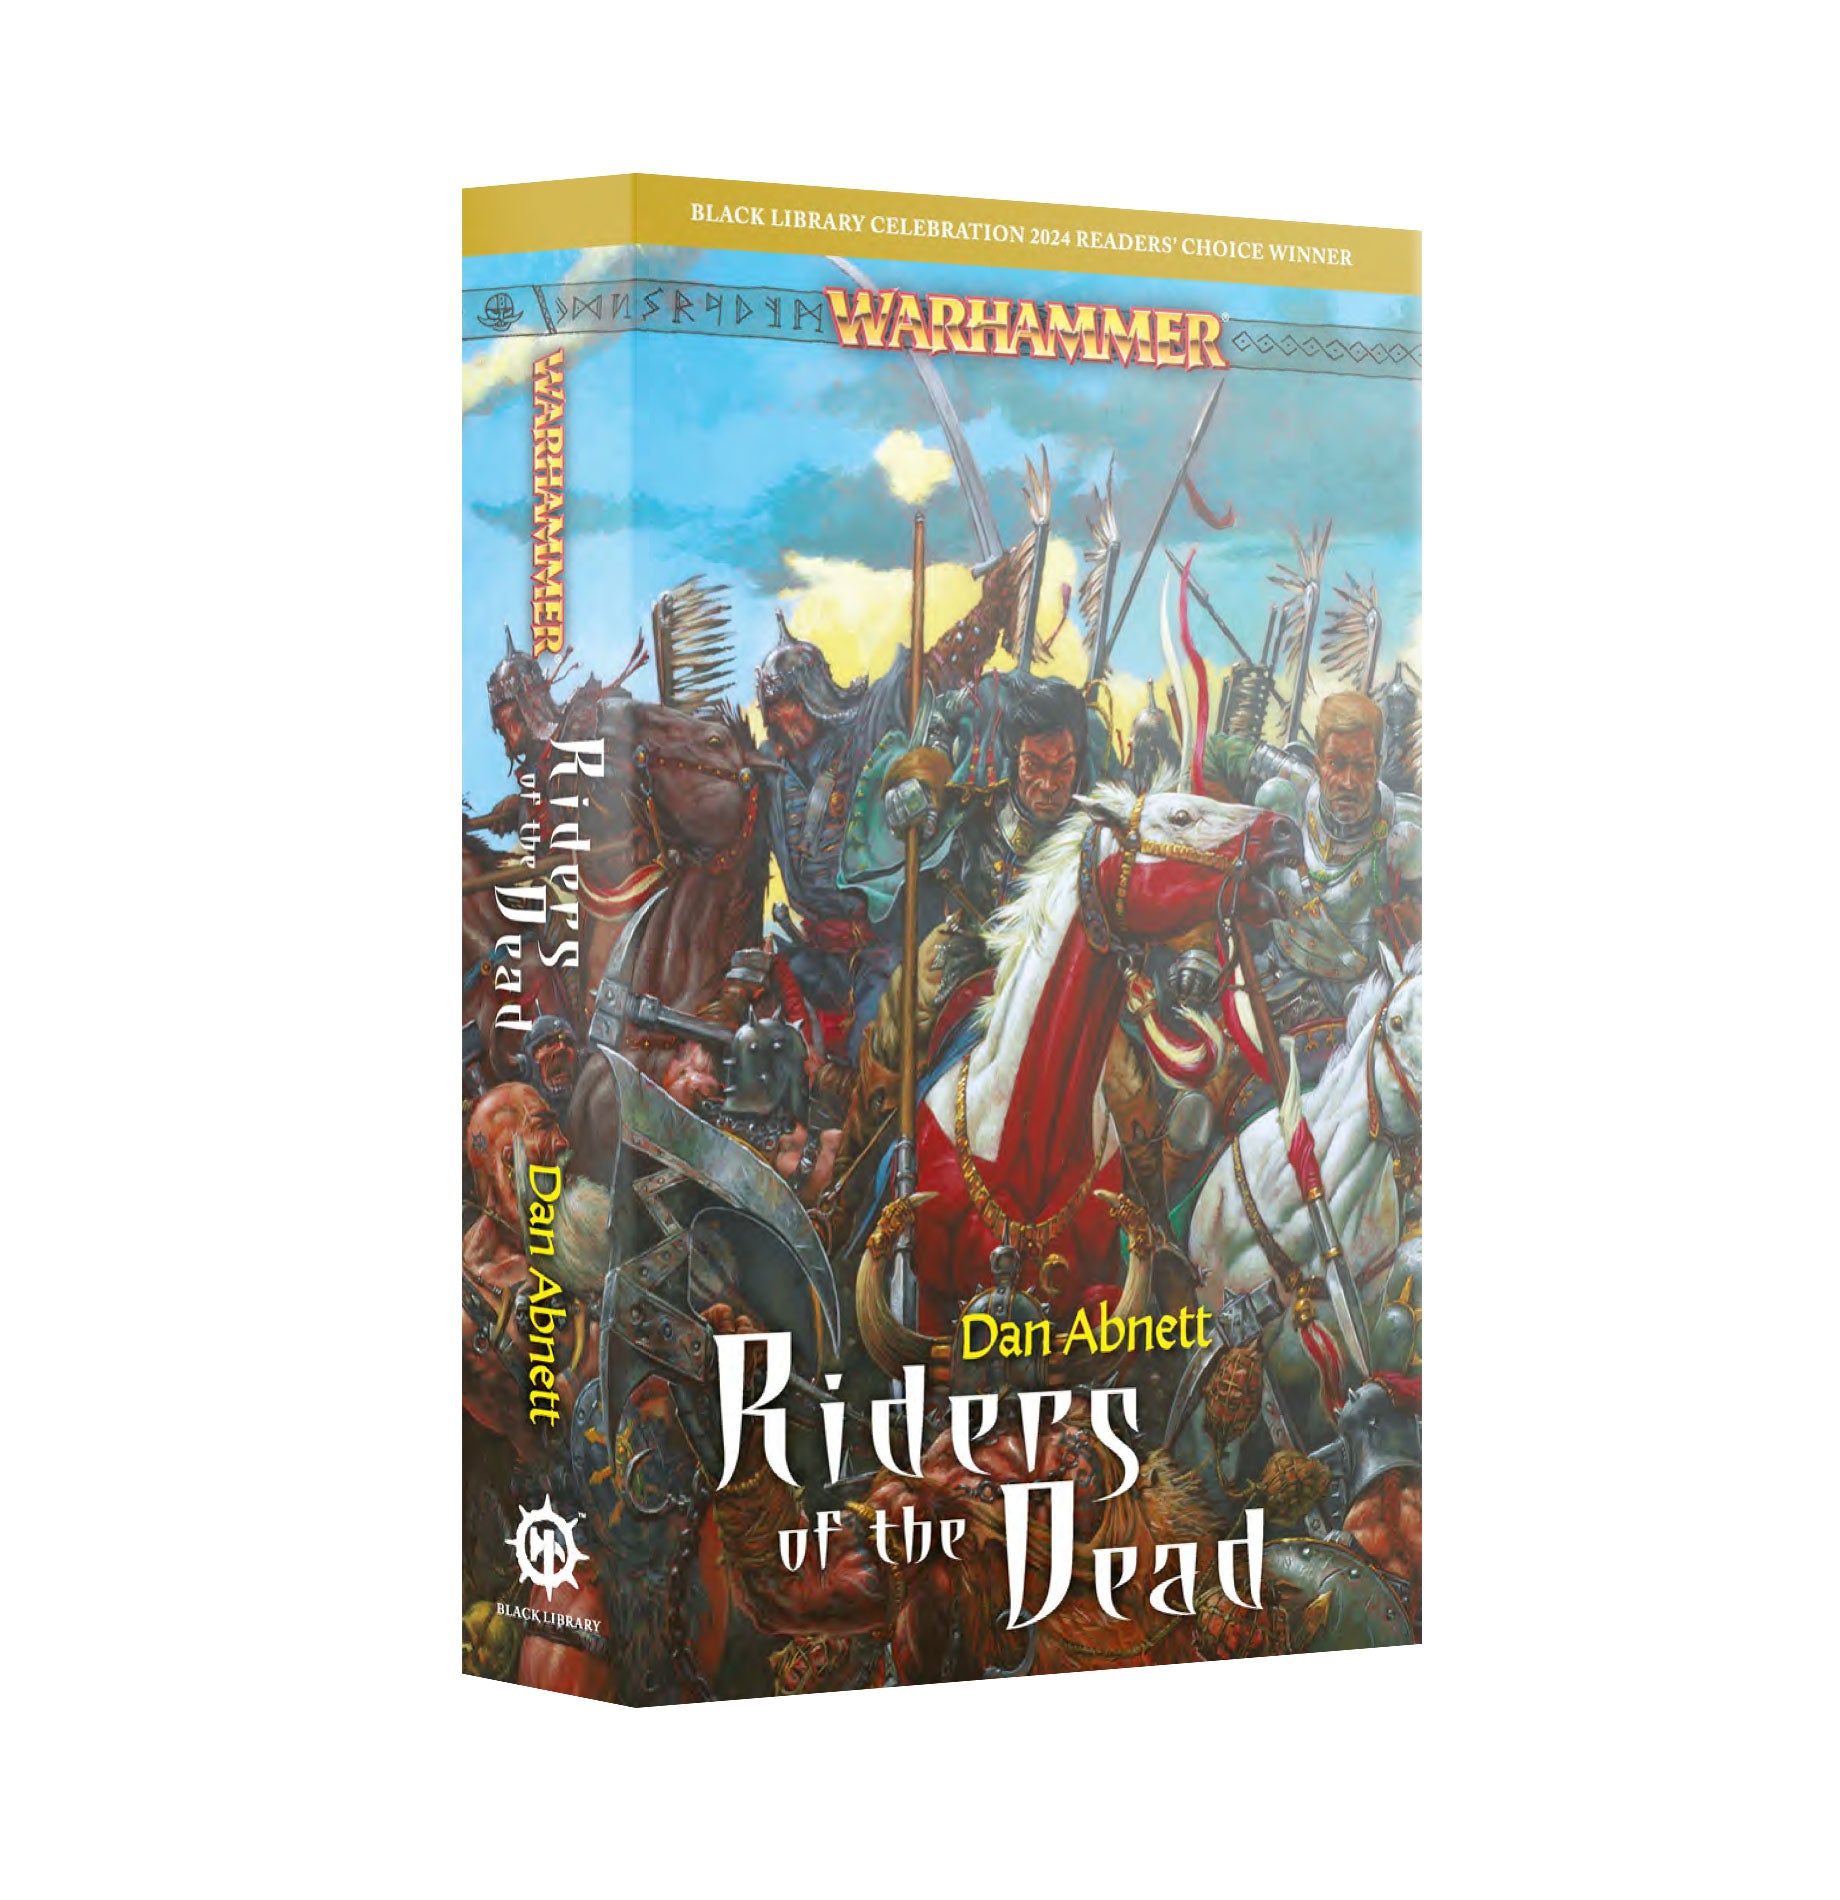 Black Library RIDERS OF THE DEAD (PB) | Impulse Games and Hobbies